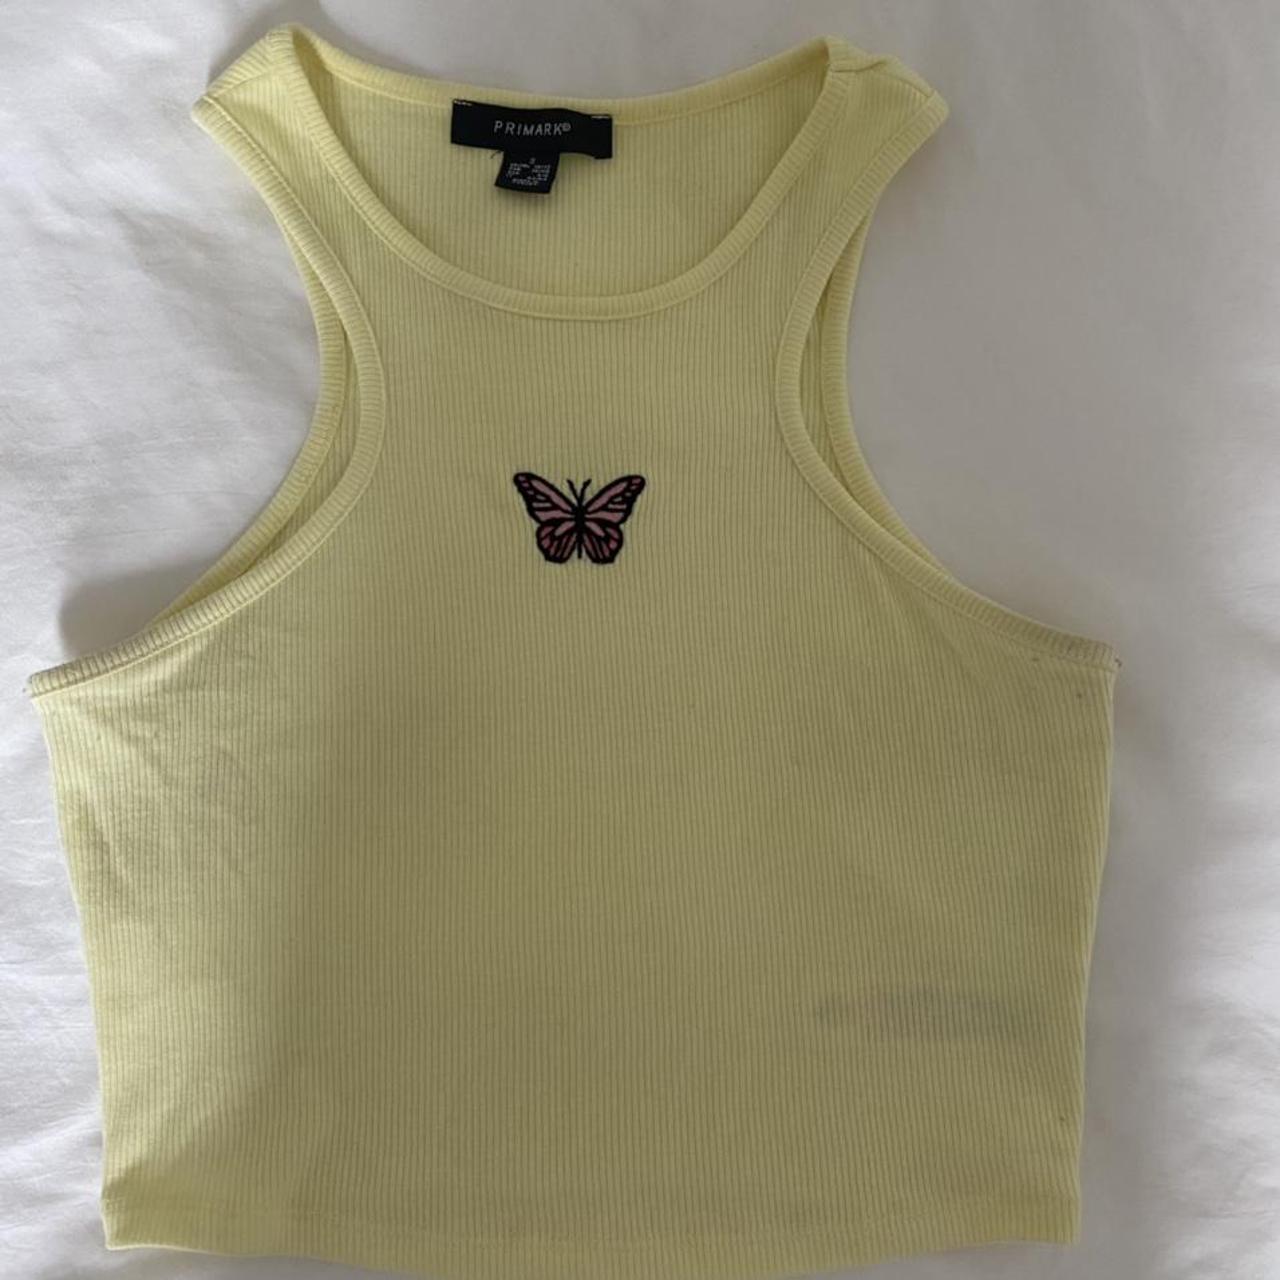 Product Image 1 - Primark yellow butterfly tank top